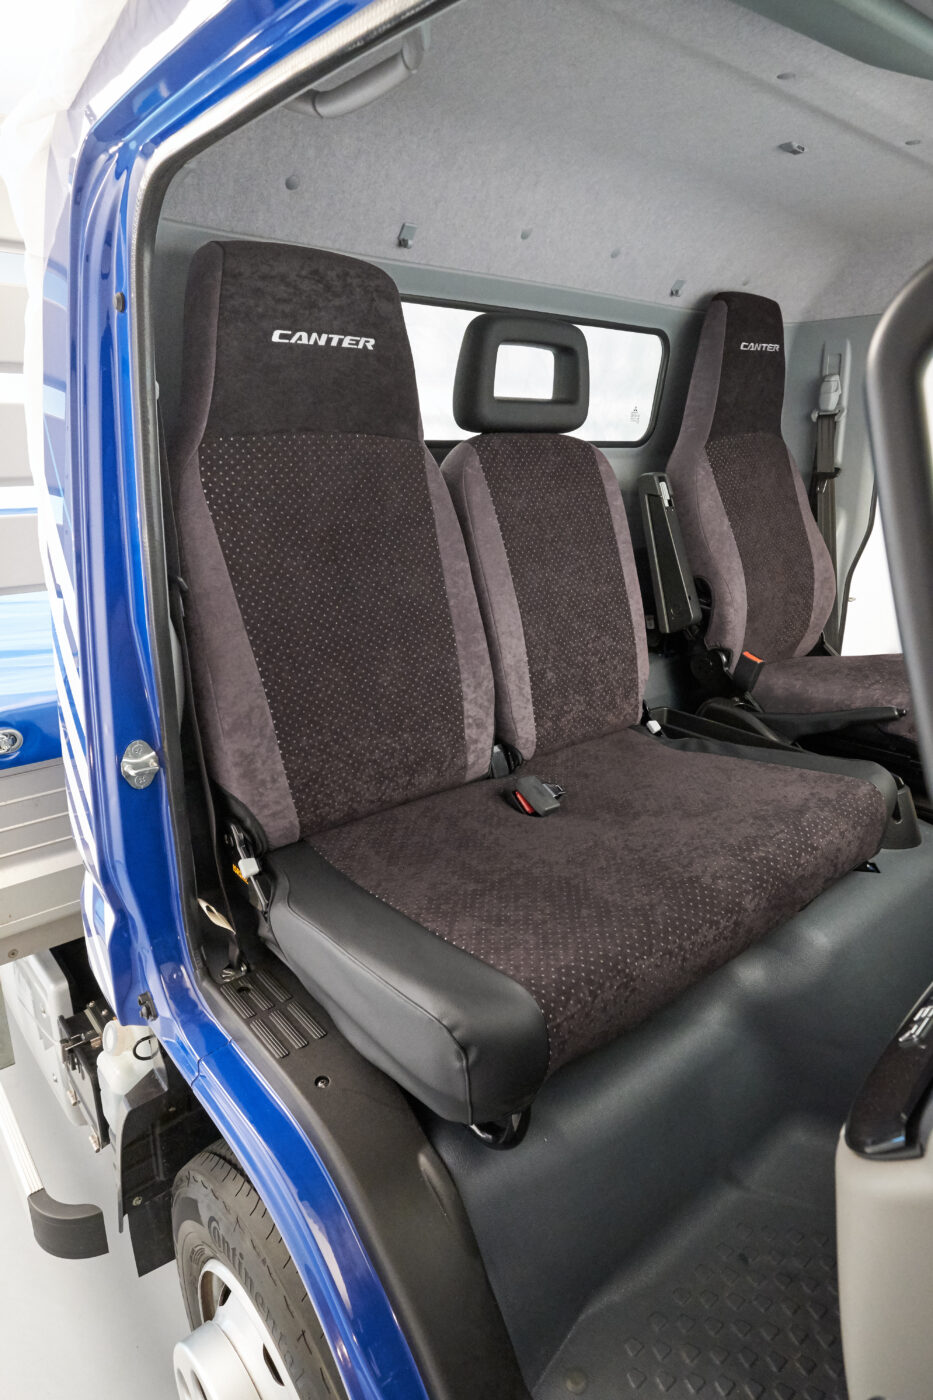 The FUSO Seat Cover is the best way to protect the interior against wear and grime. It extends the lifetime of the seats and helps to retain the value of the Canter by giving the truck a high-quality appearance. The FUSO Seat Cover “ALCANTA” provides an elegant design for the truck. Furthermore, all Seat Covers offer maximum comfort without compromising on functionality, such as the  integrated desk of the double co-driver seat.